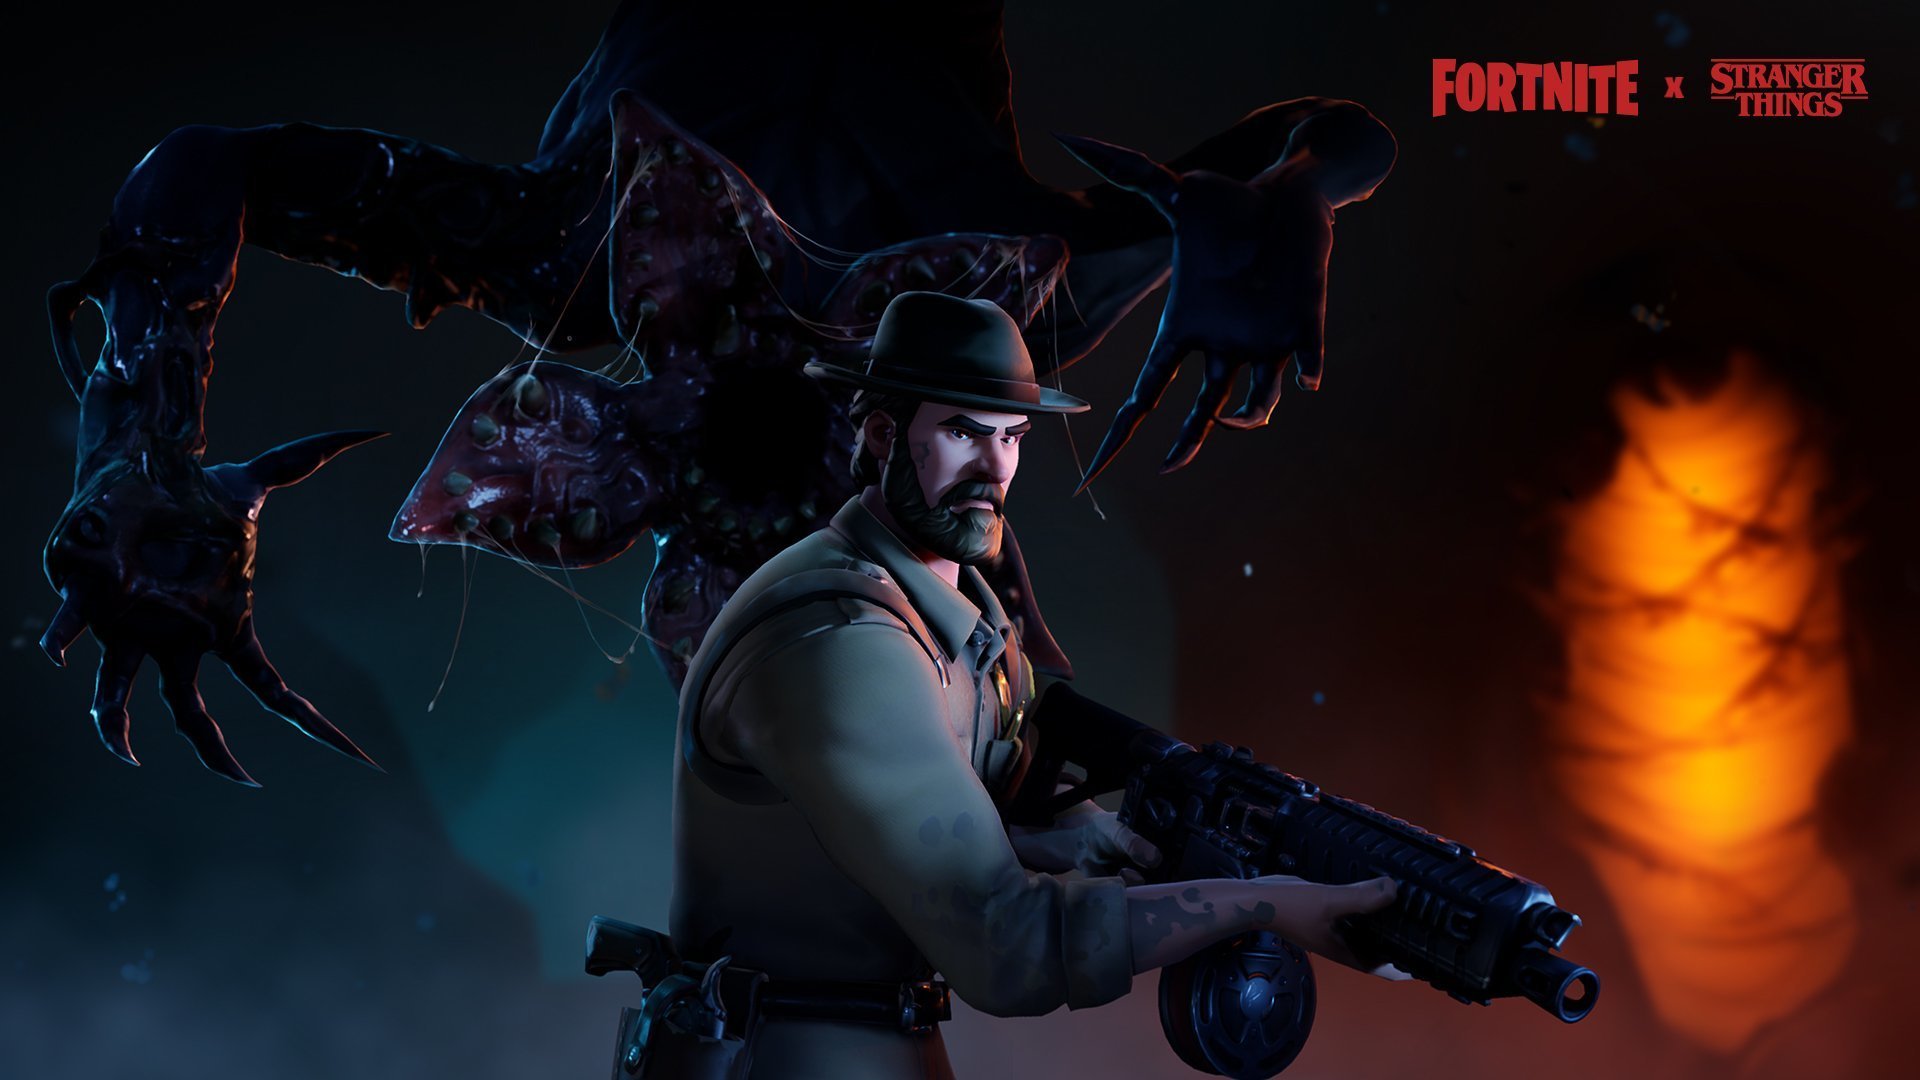 Stranger Things Fortnite Cosmetics And Skins Now Available   GameSpot 1920x1080